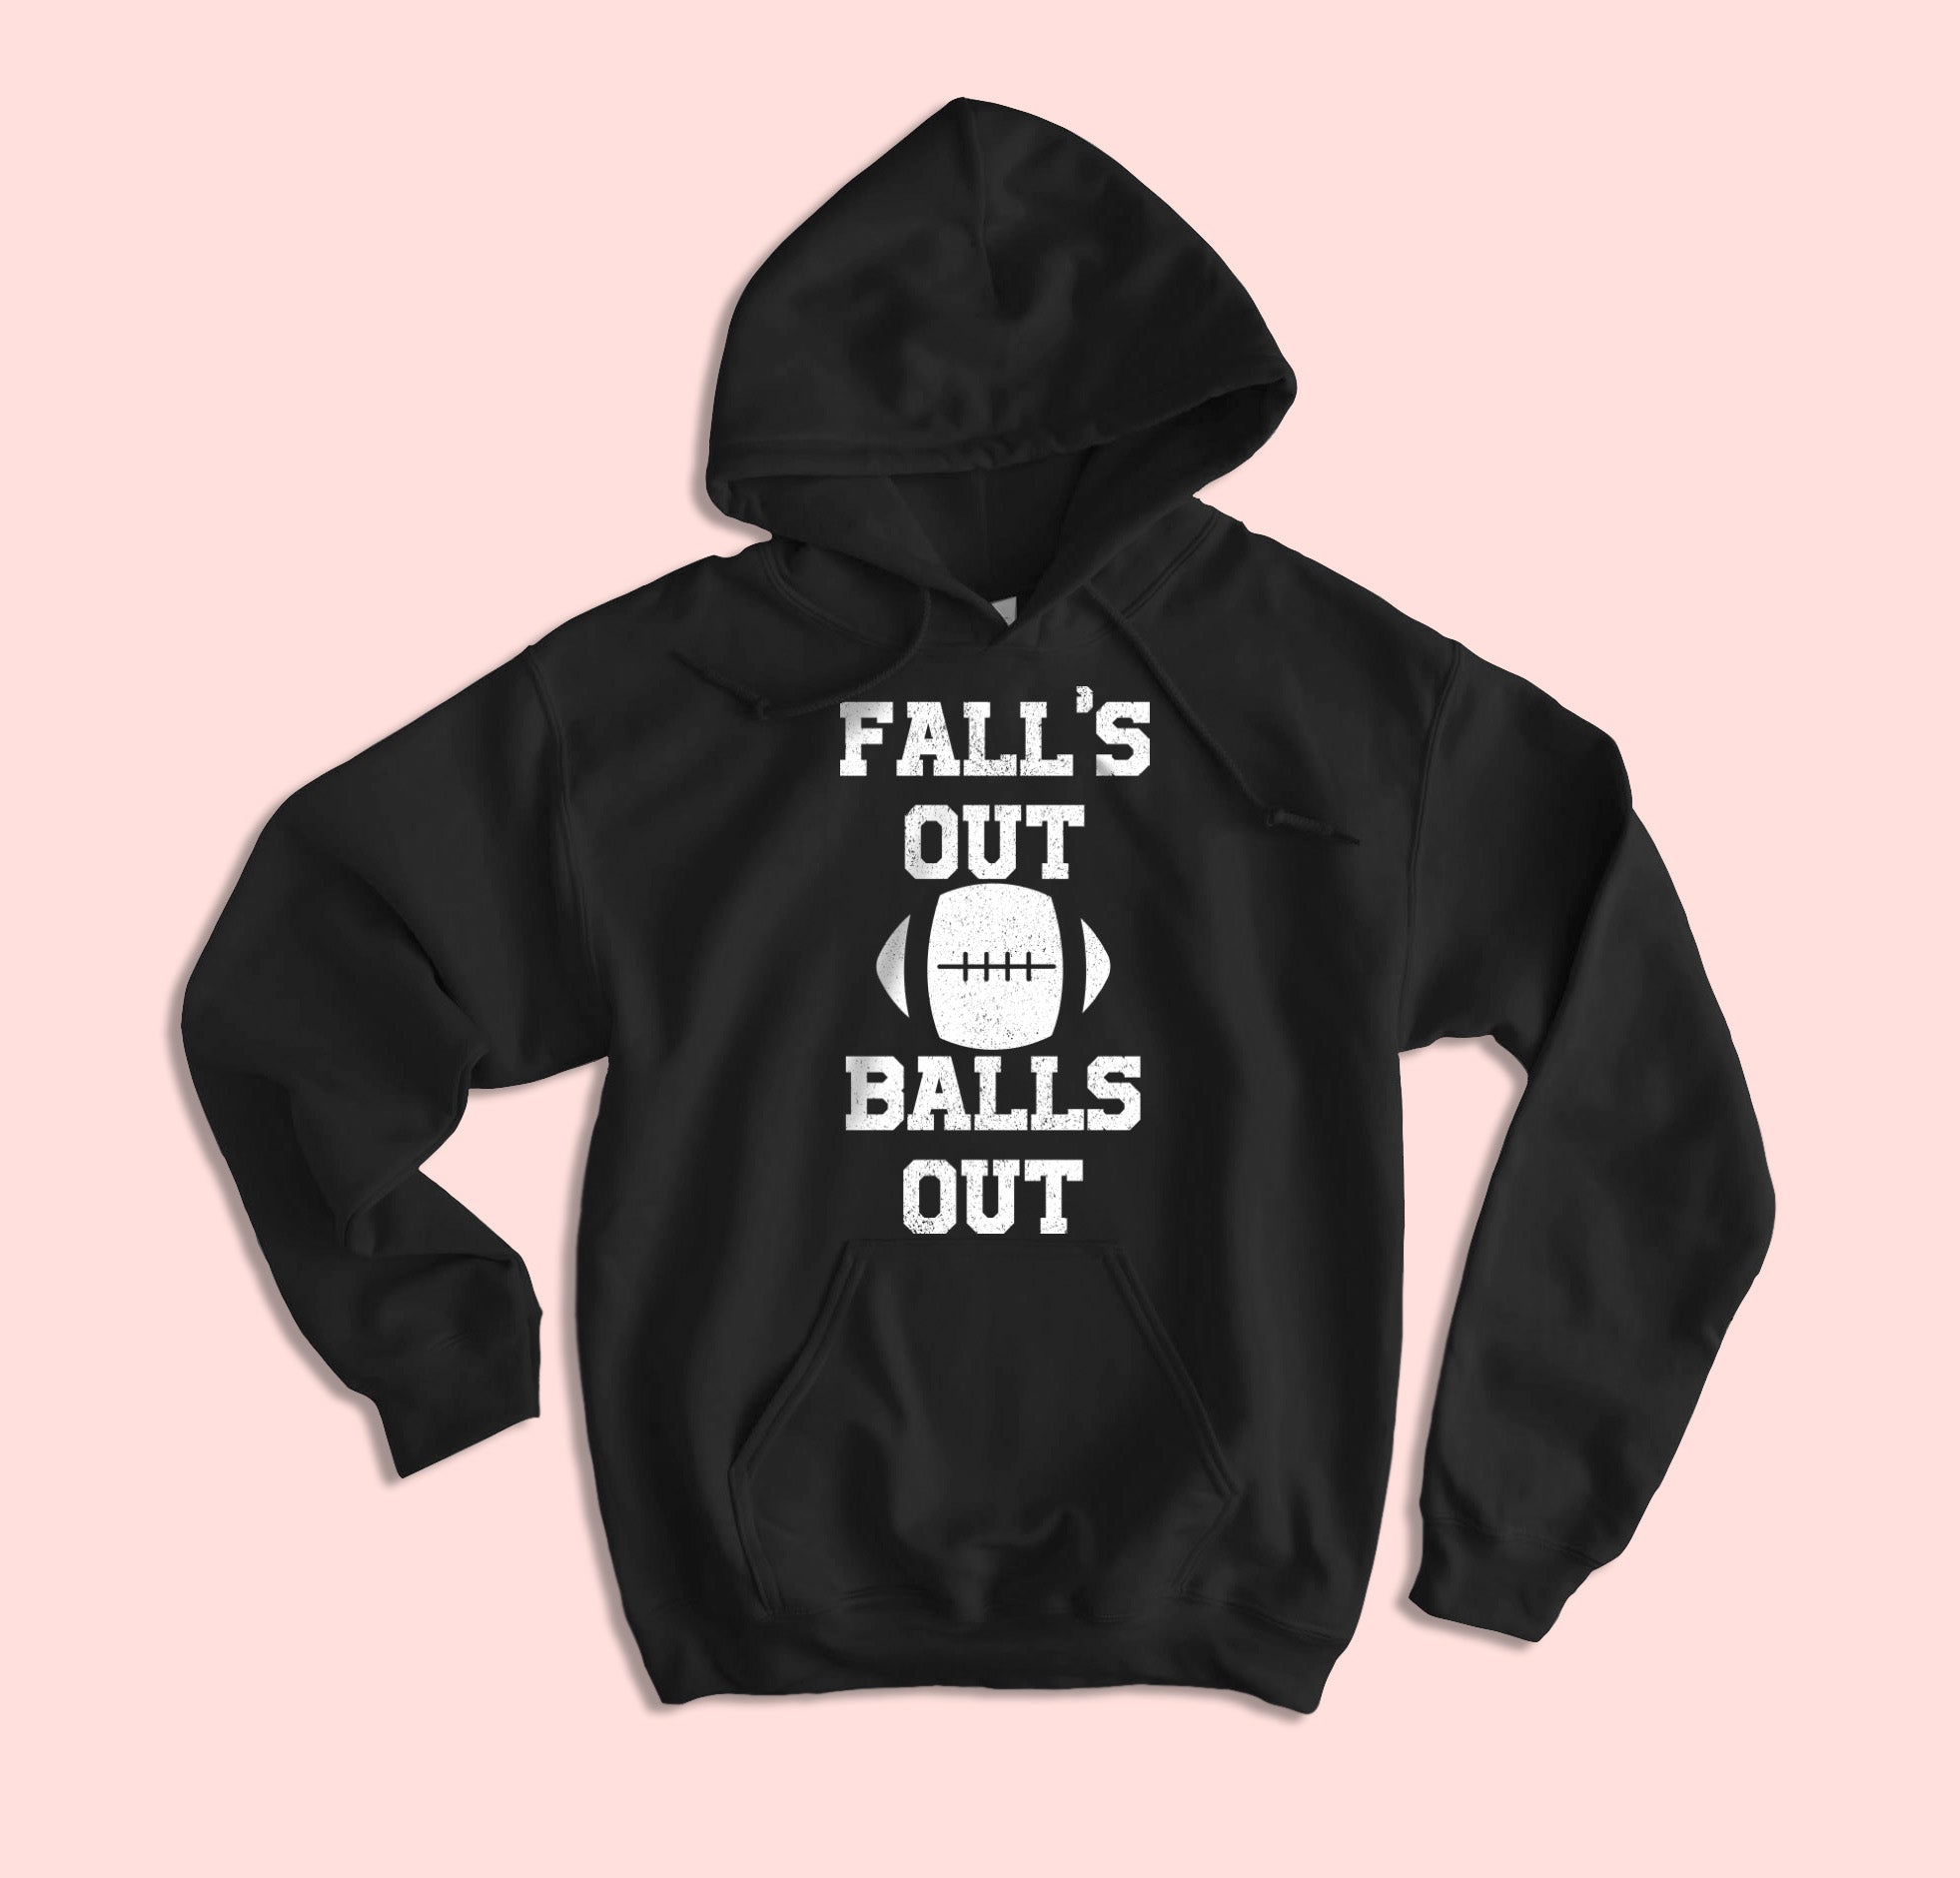 Fall's Out Ball's Out Hoodie